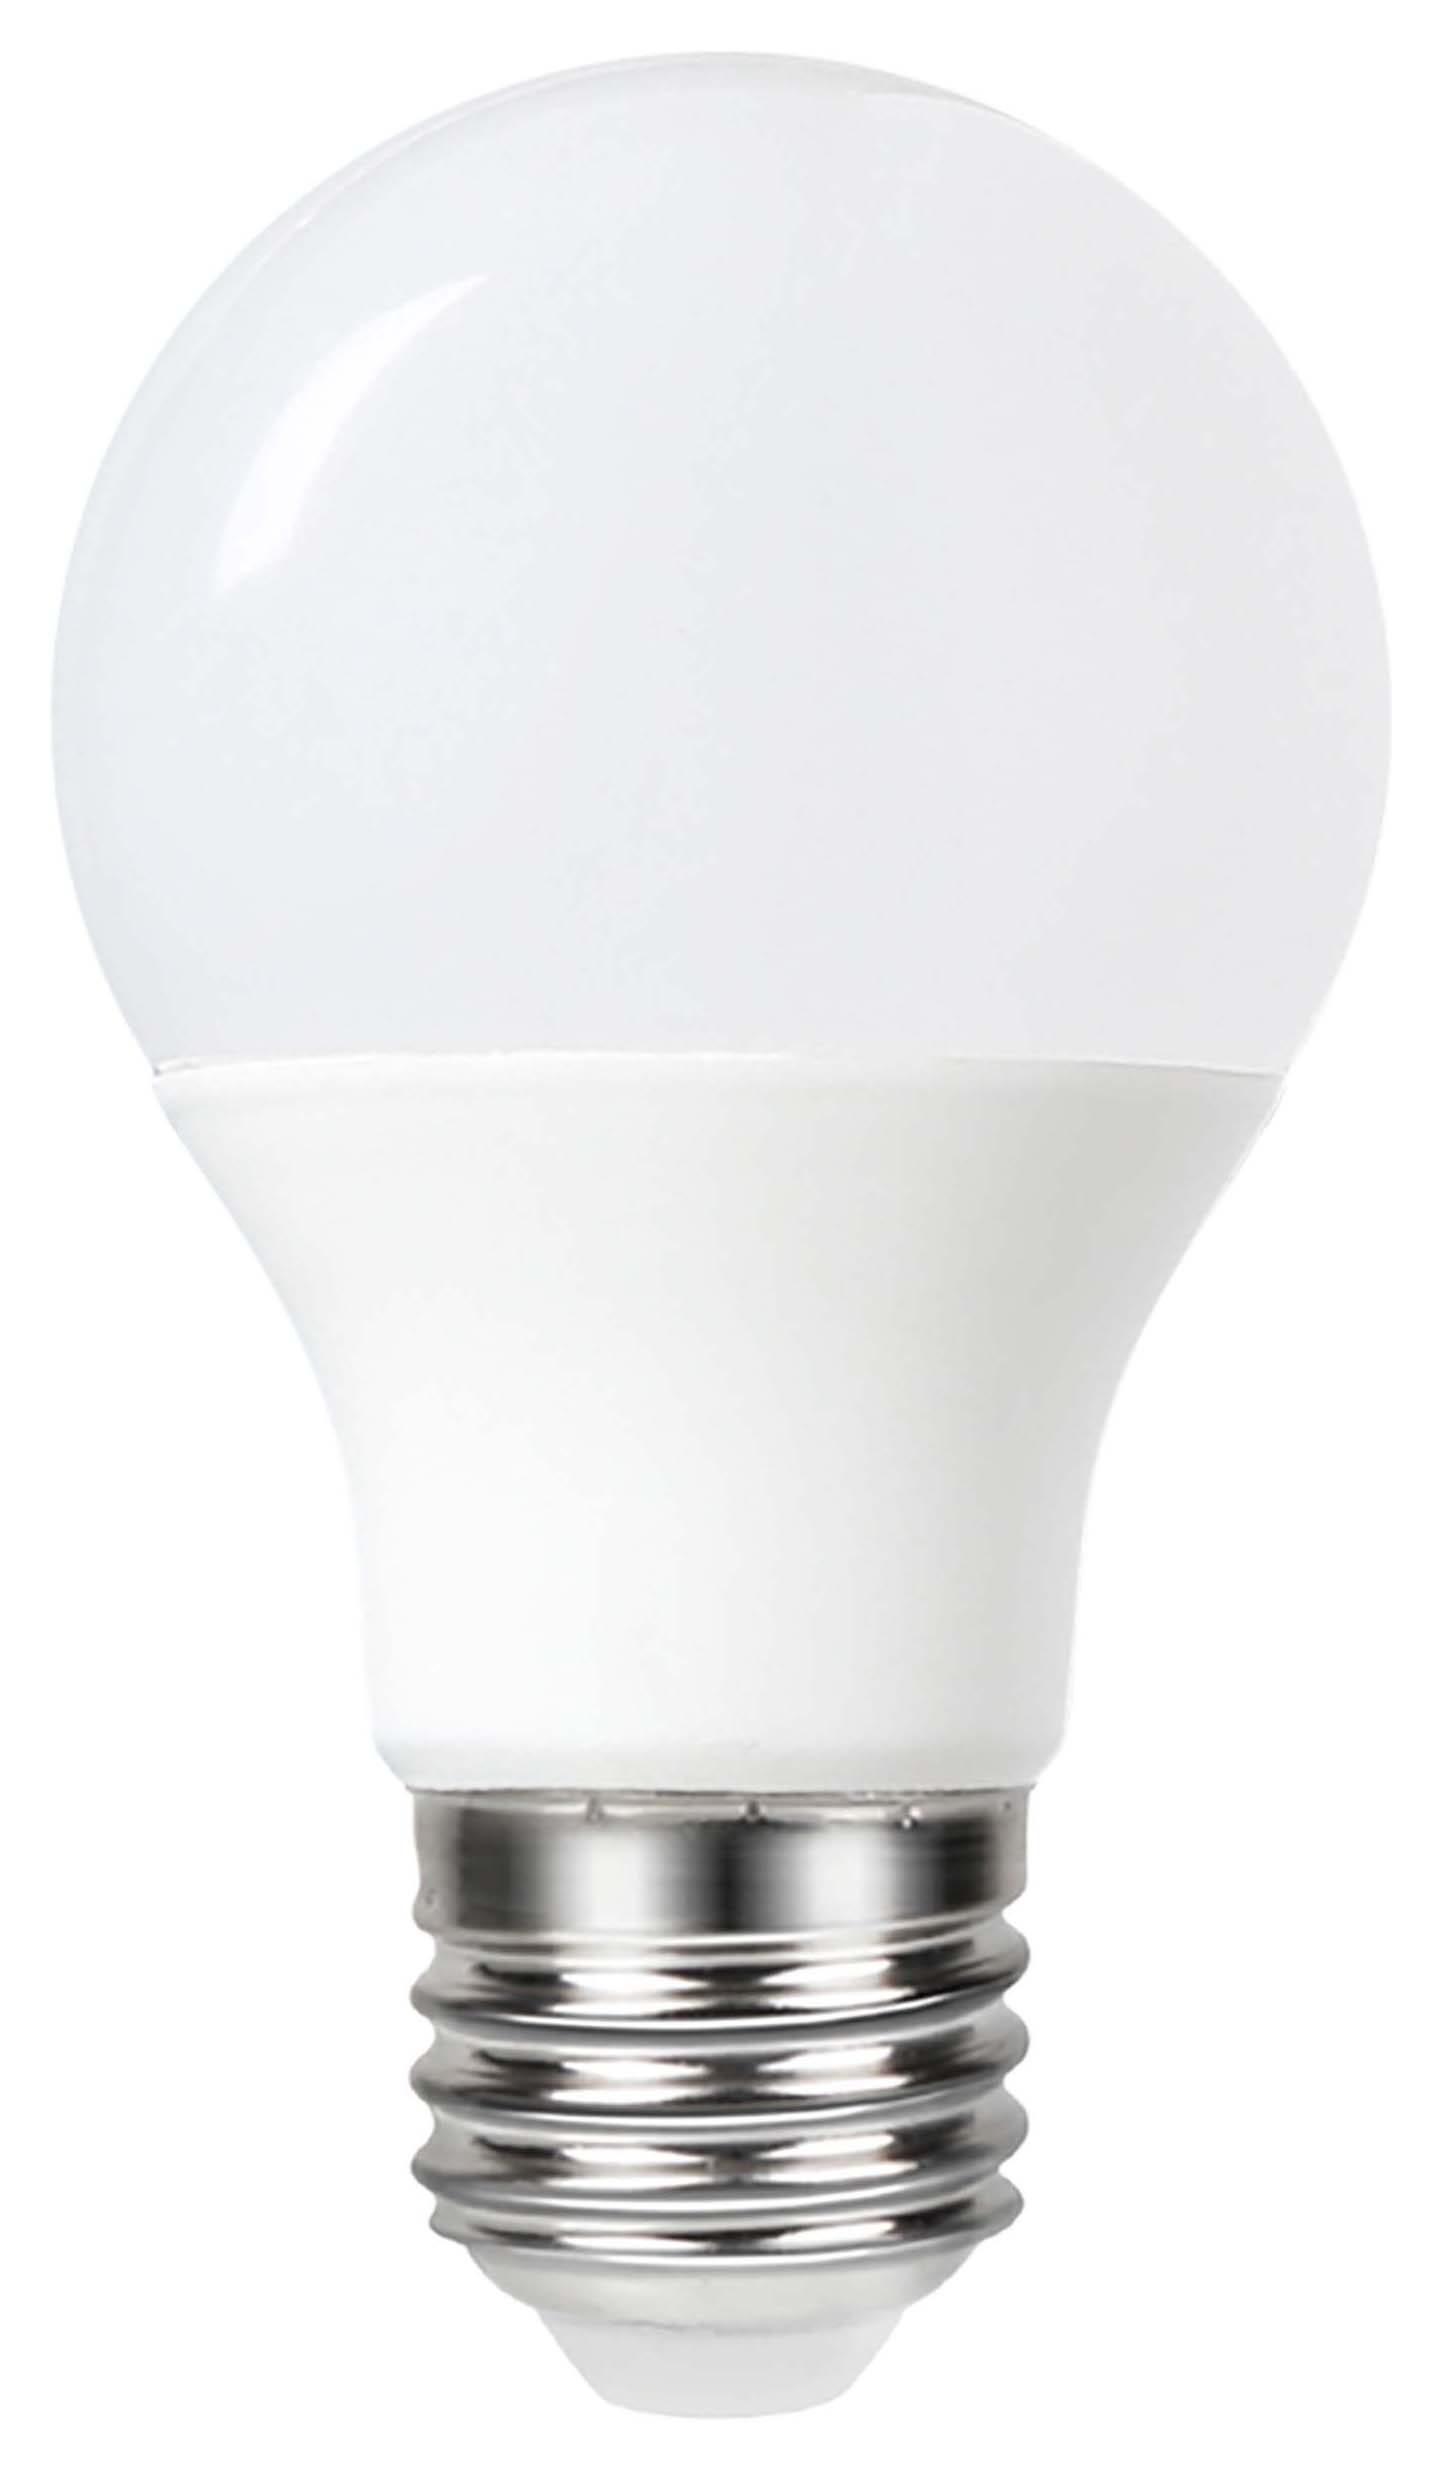 Image of Wickes Non-Dimmable GLS Opal LED E27 8.8W Warm White Light Bulb